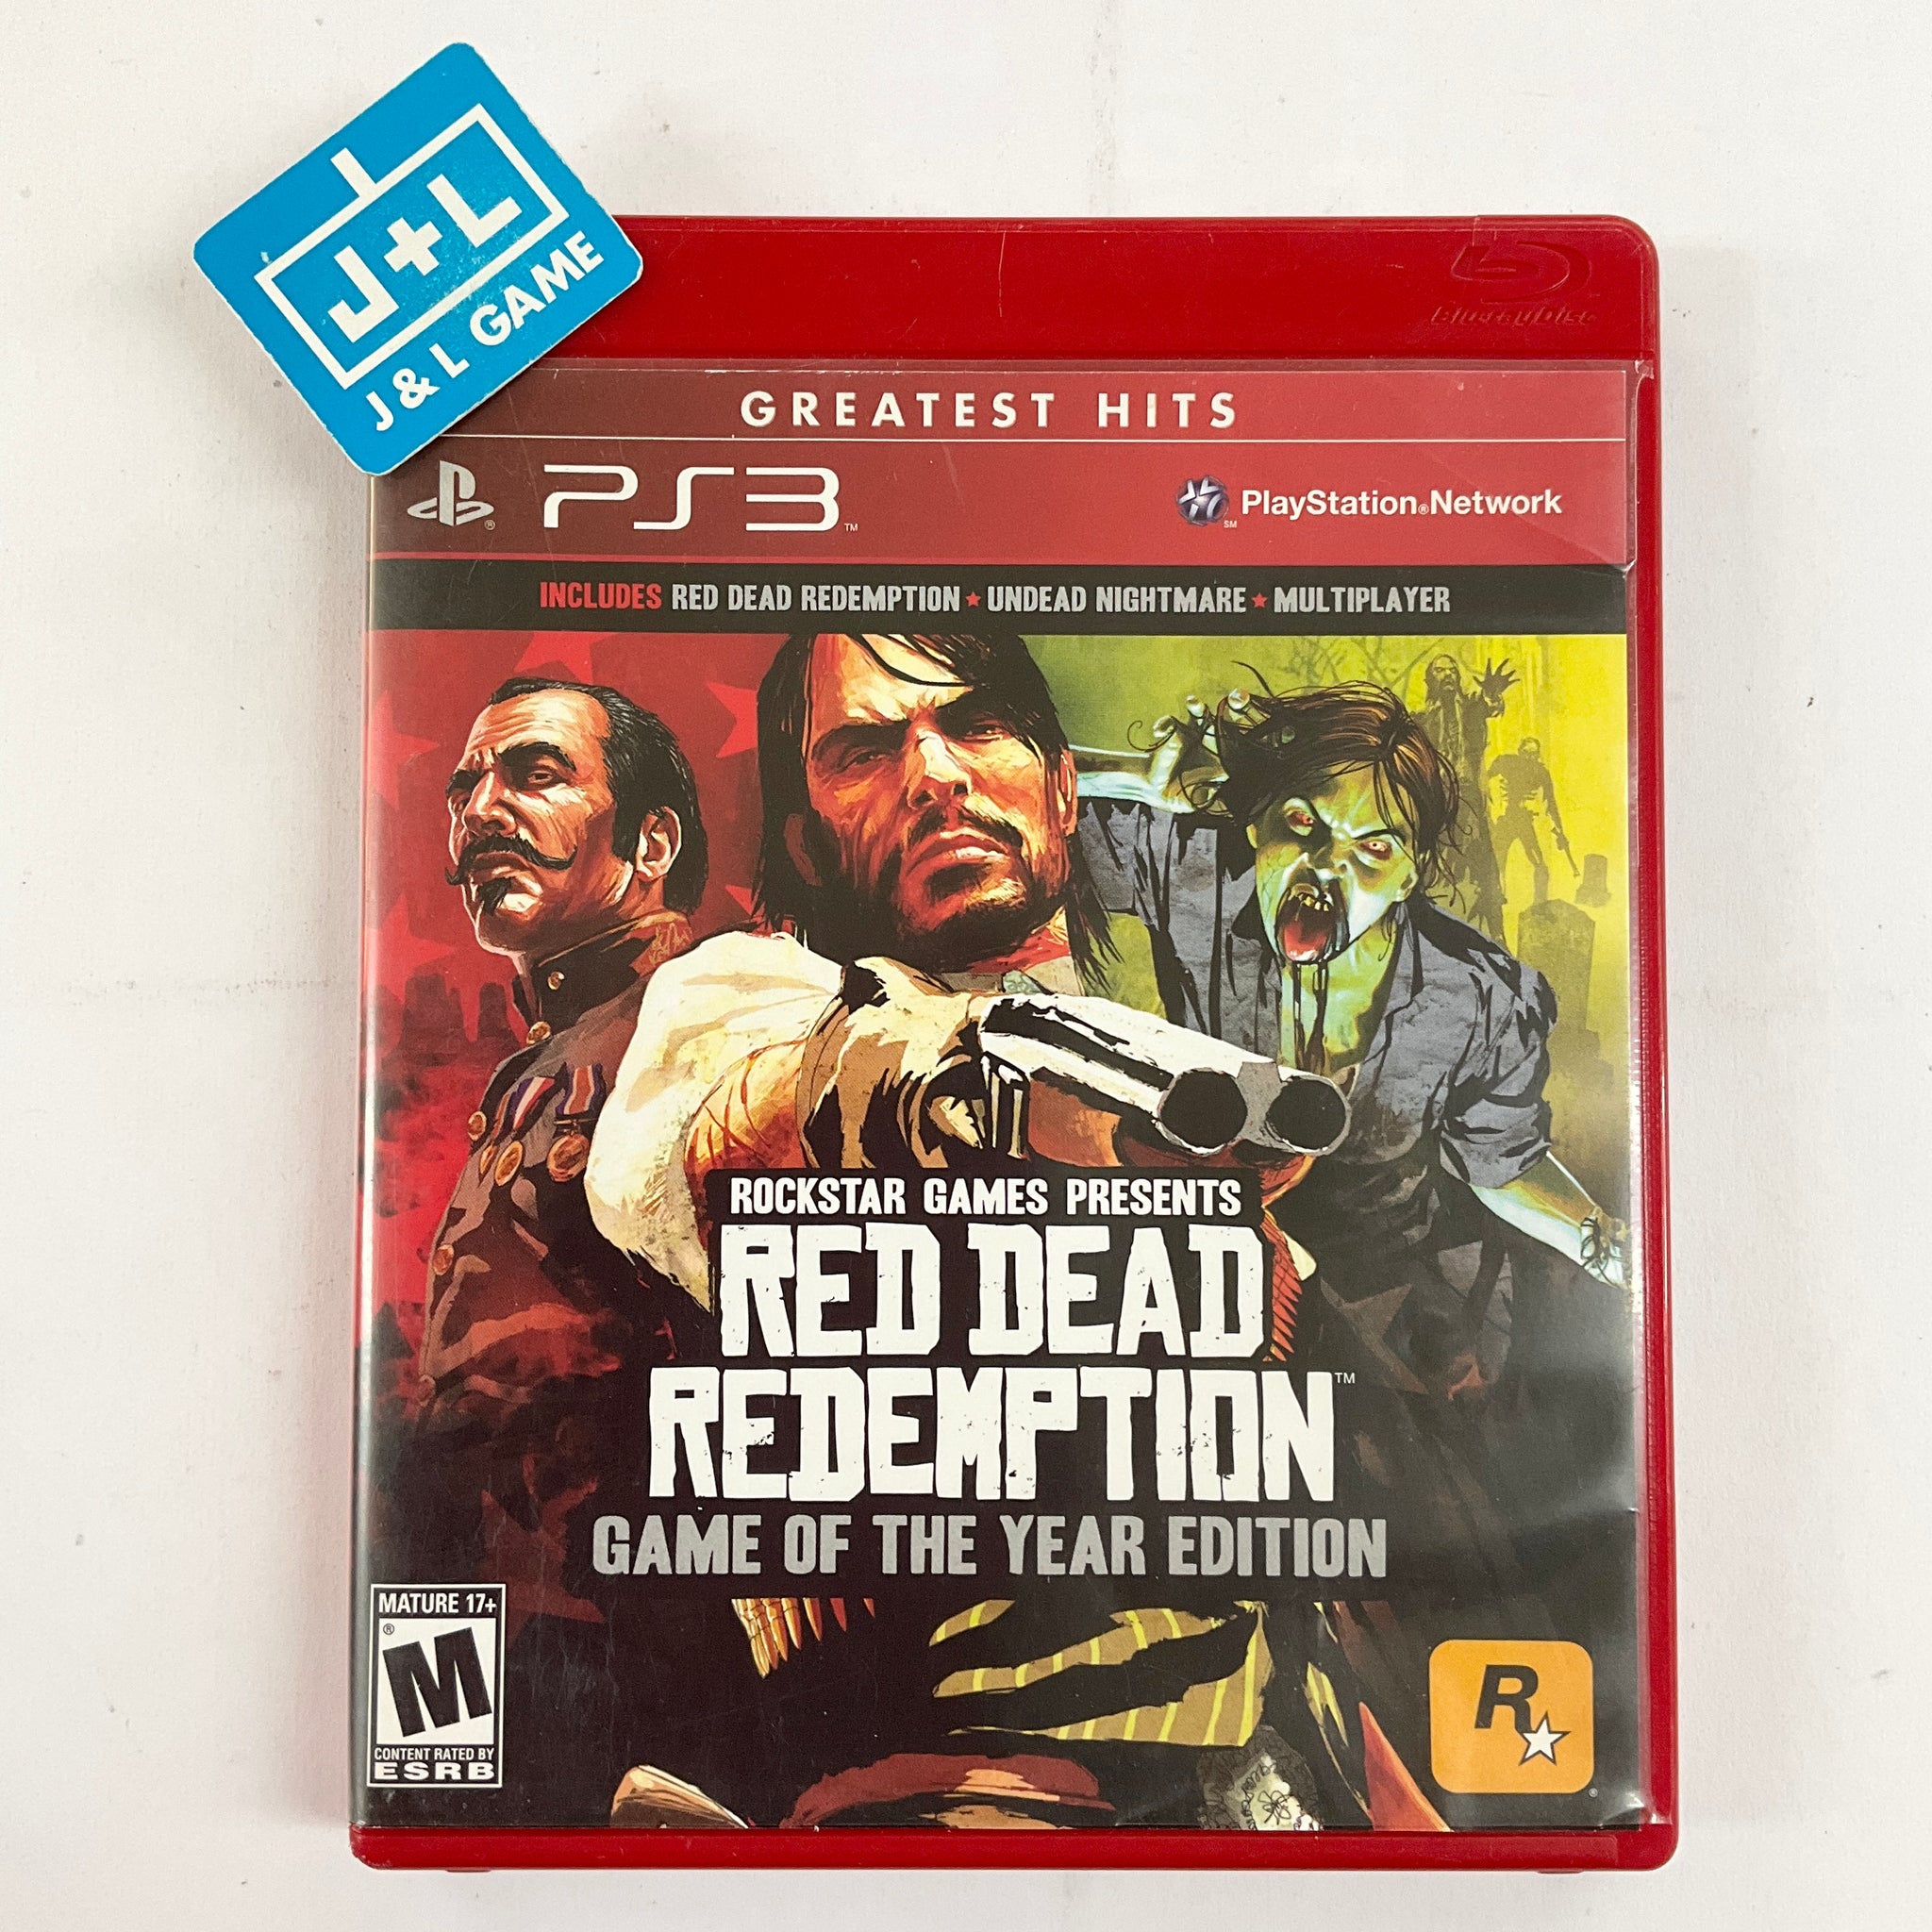 Red Dead Redemption - Playstation 3